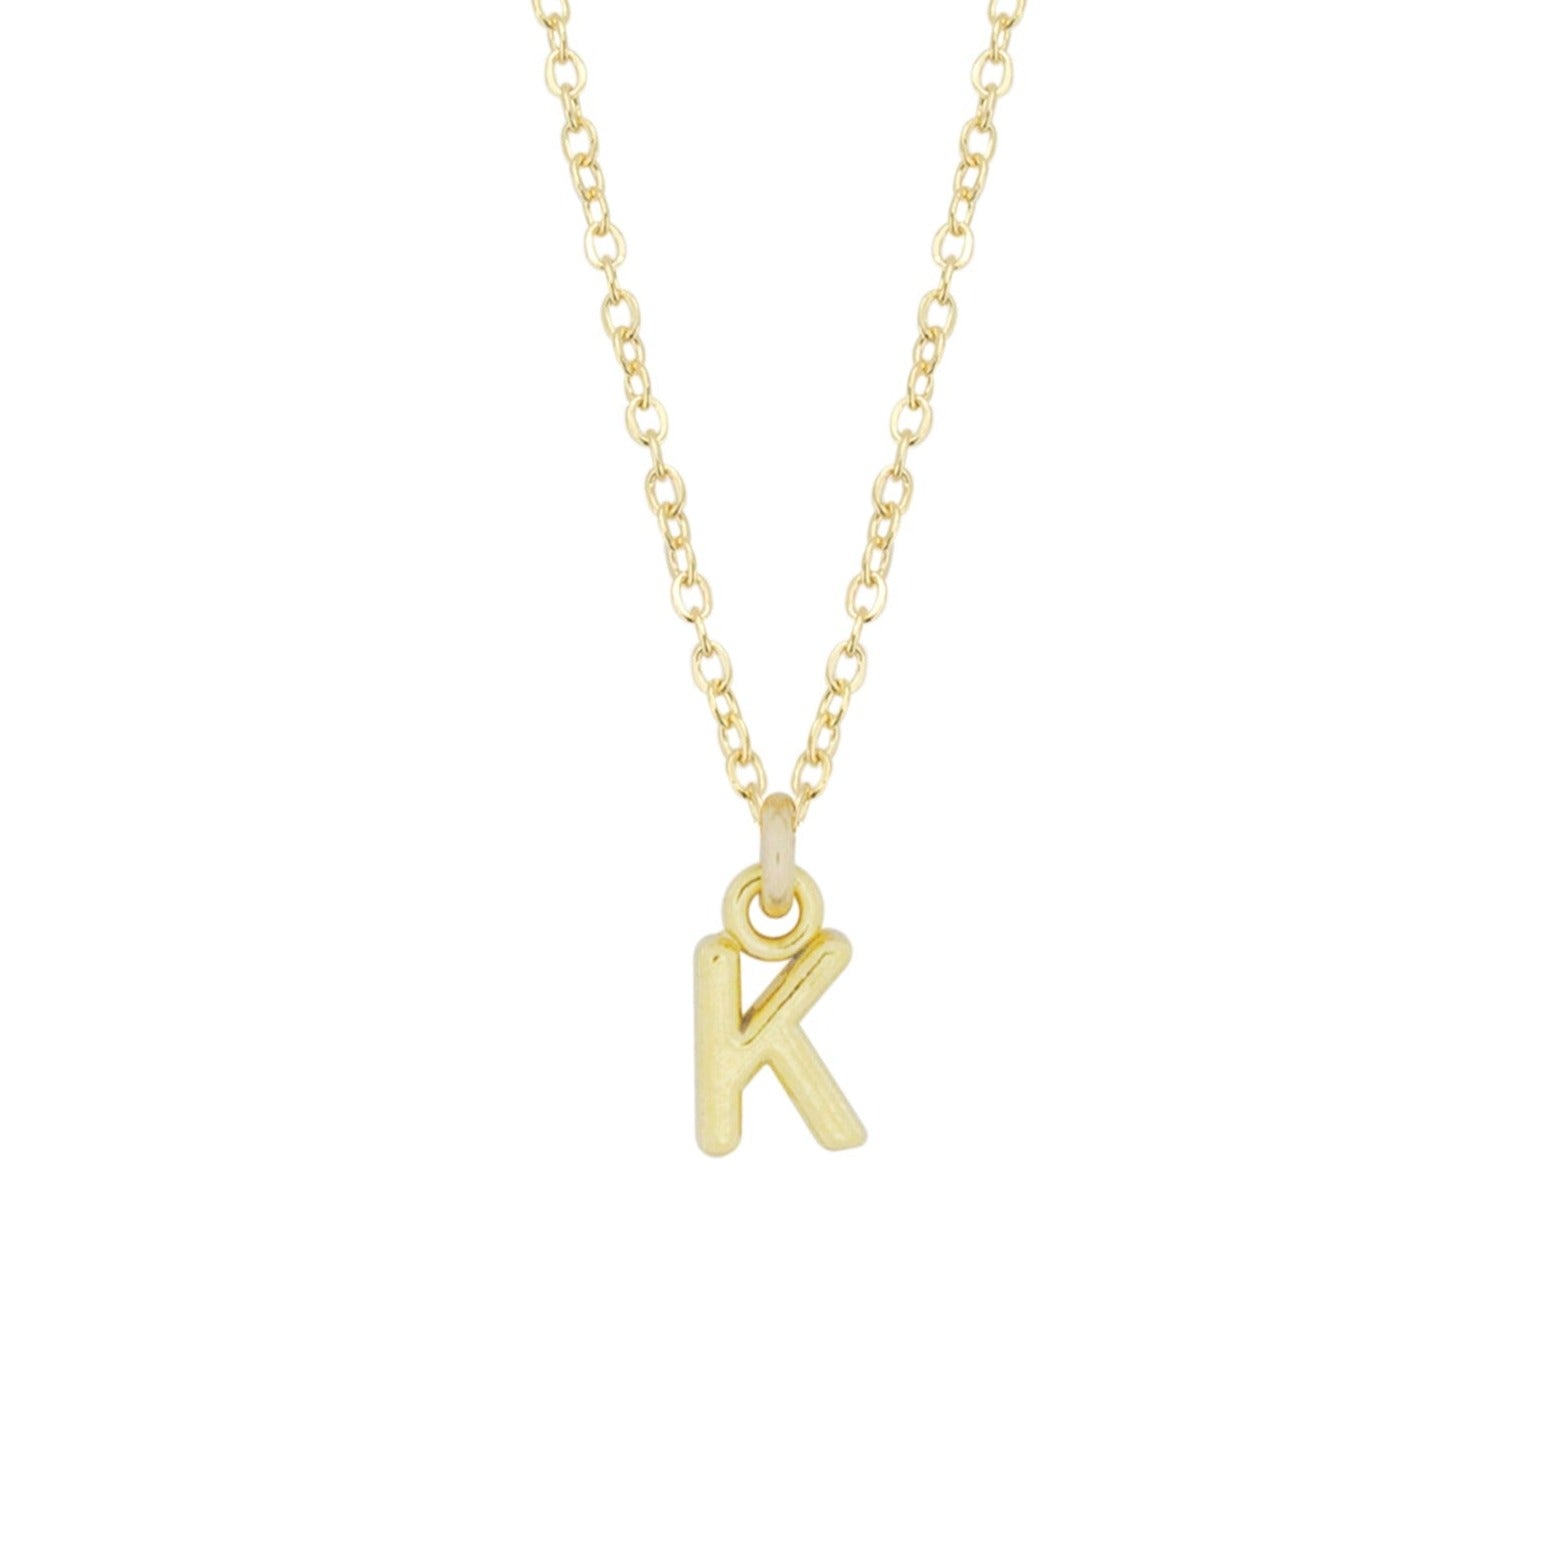 K Gold Initial Necklace by Katie Dean Jewelry, made in America, perfect for the dainty minimal jewelry lovers